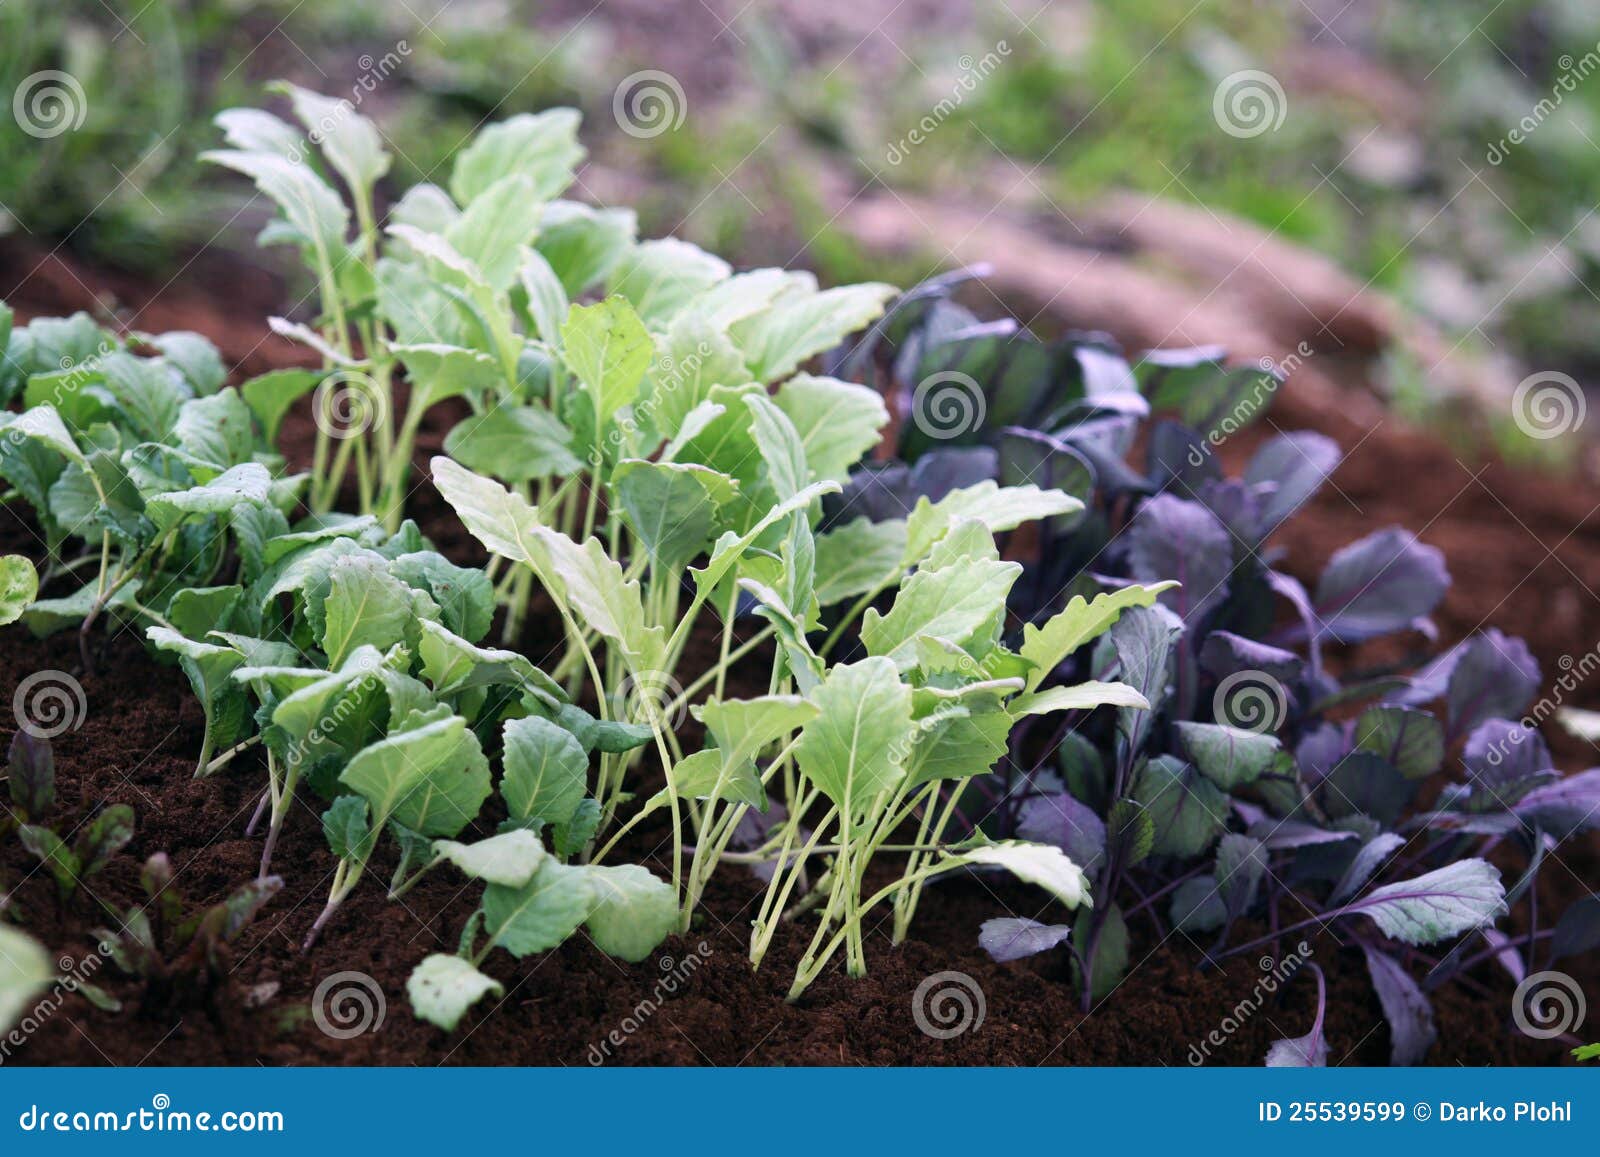 young vegetable plants